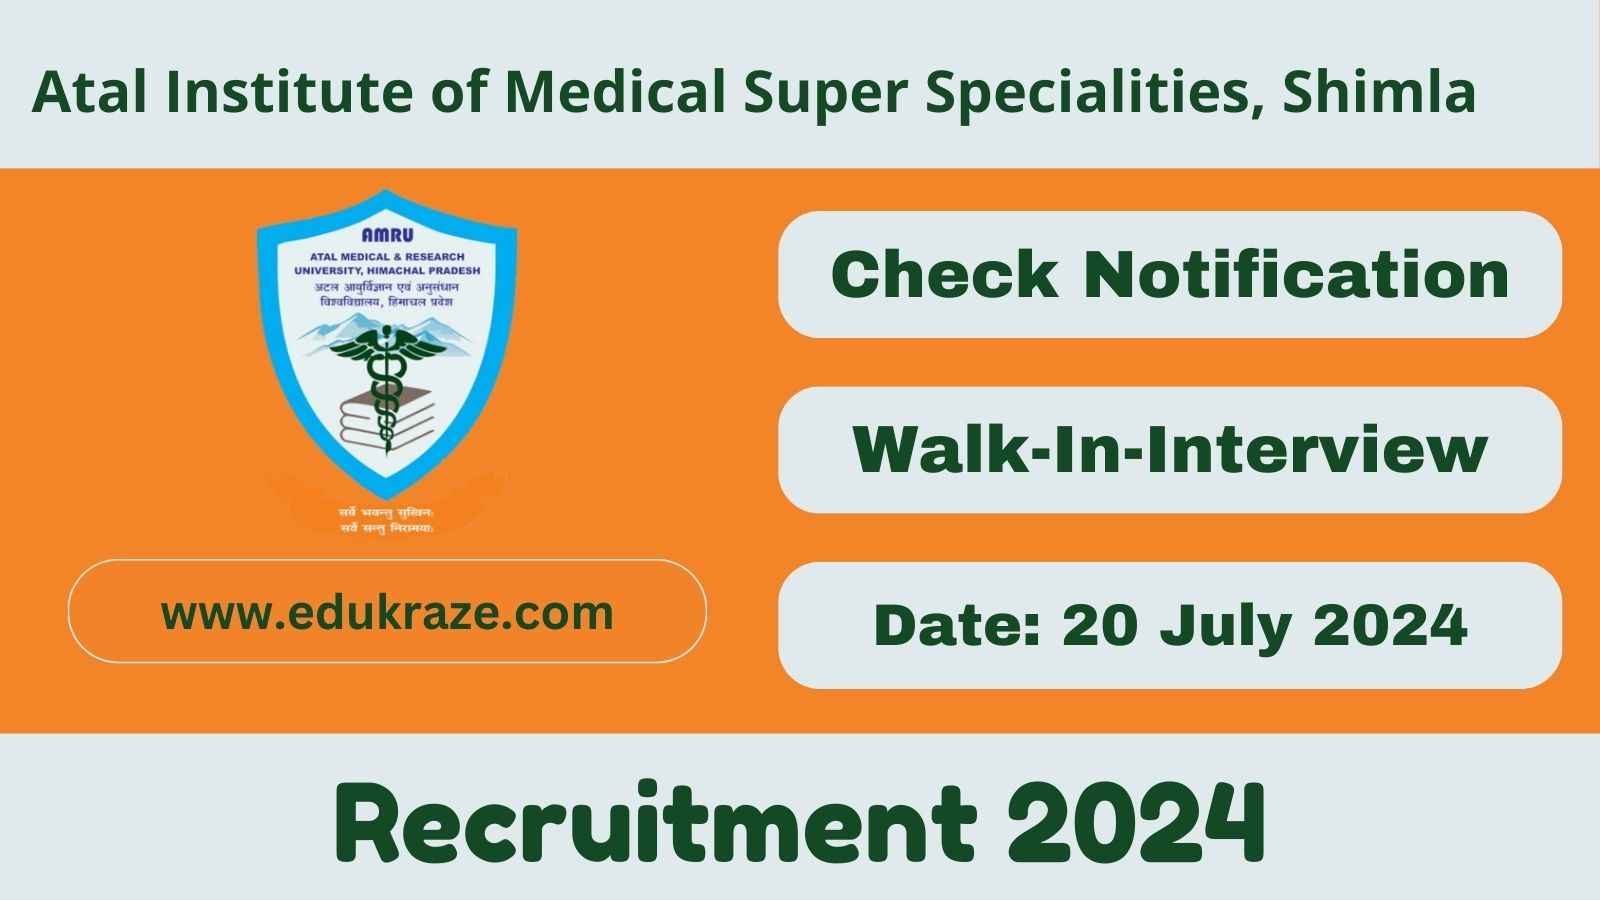 Walk-in Interview at Atal Institute of Medical Super Specialities, Shimla